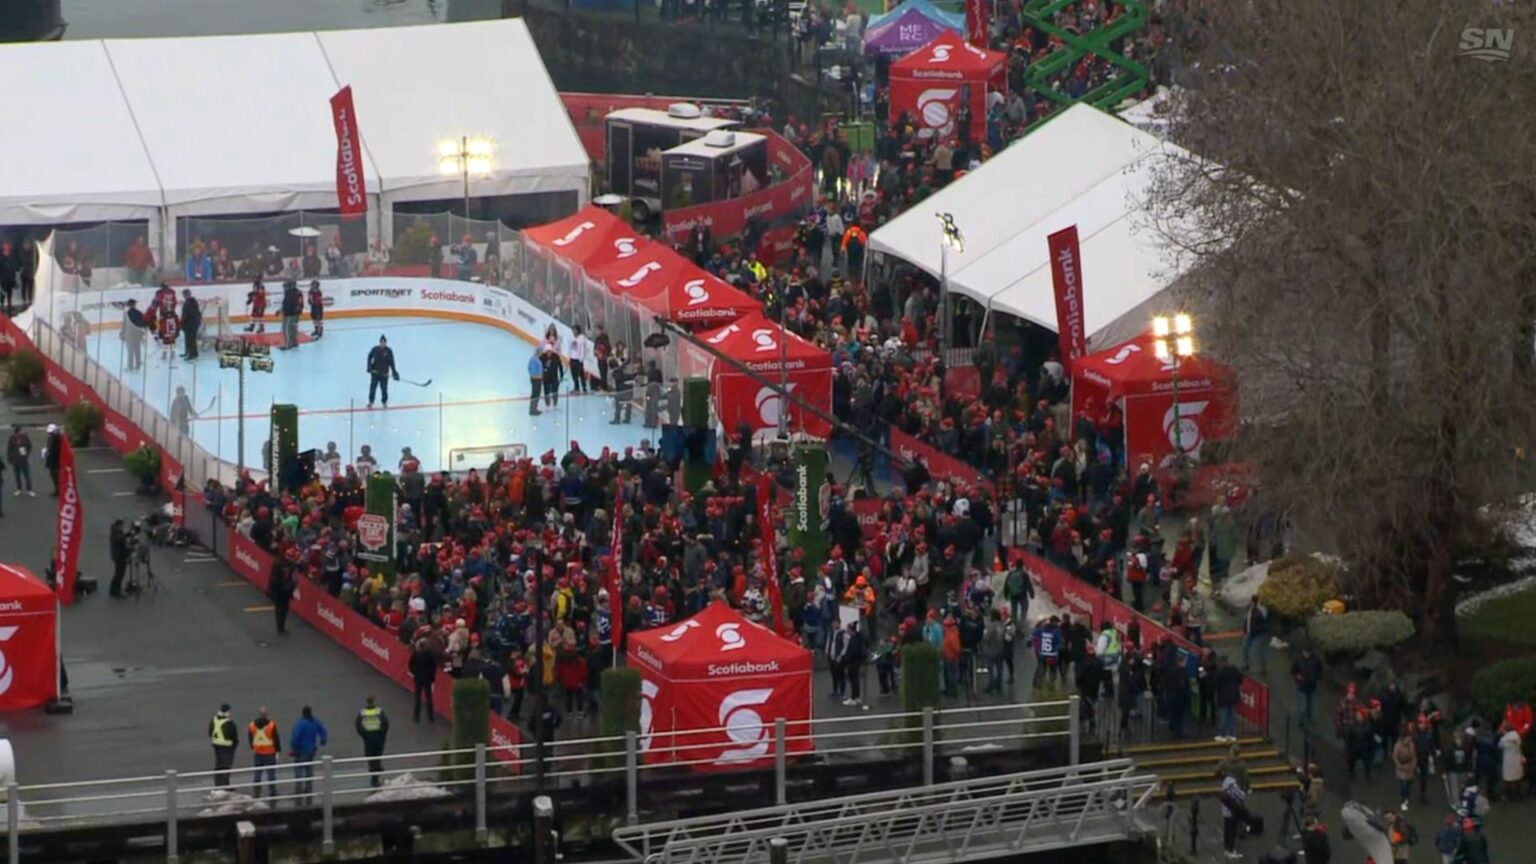 Scotiabank Hockey Day Real Life Event Image